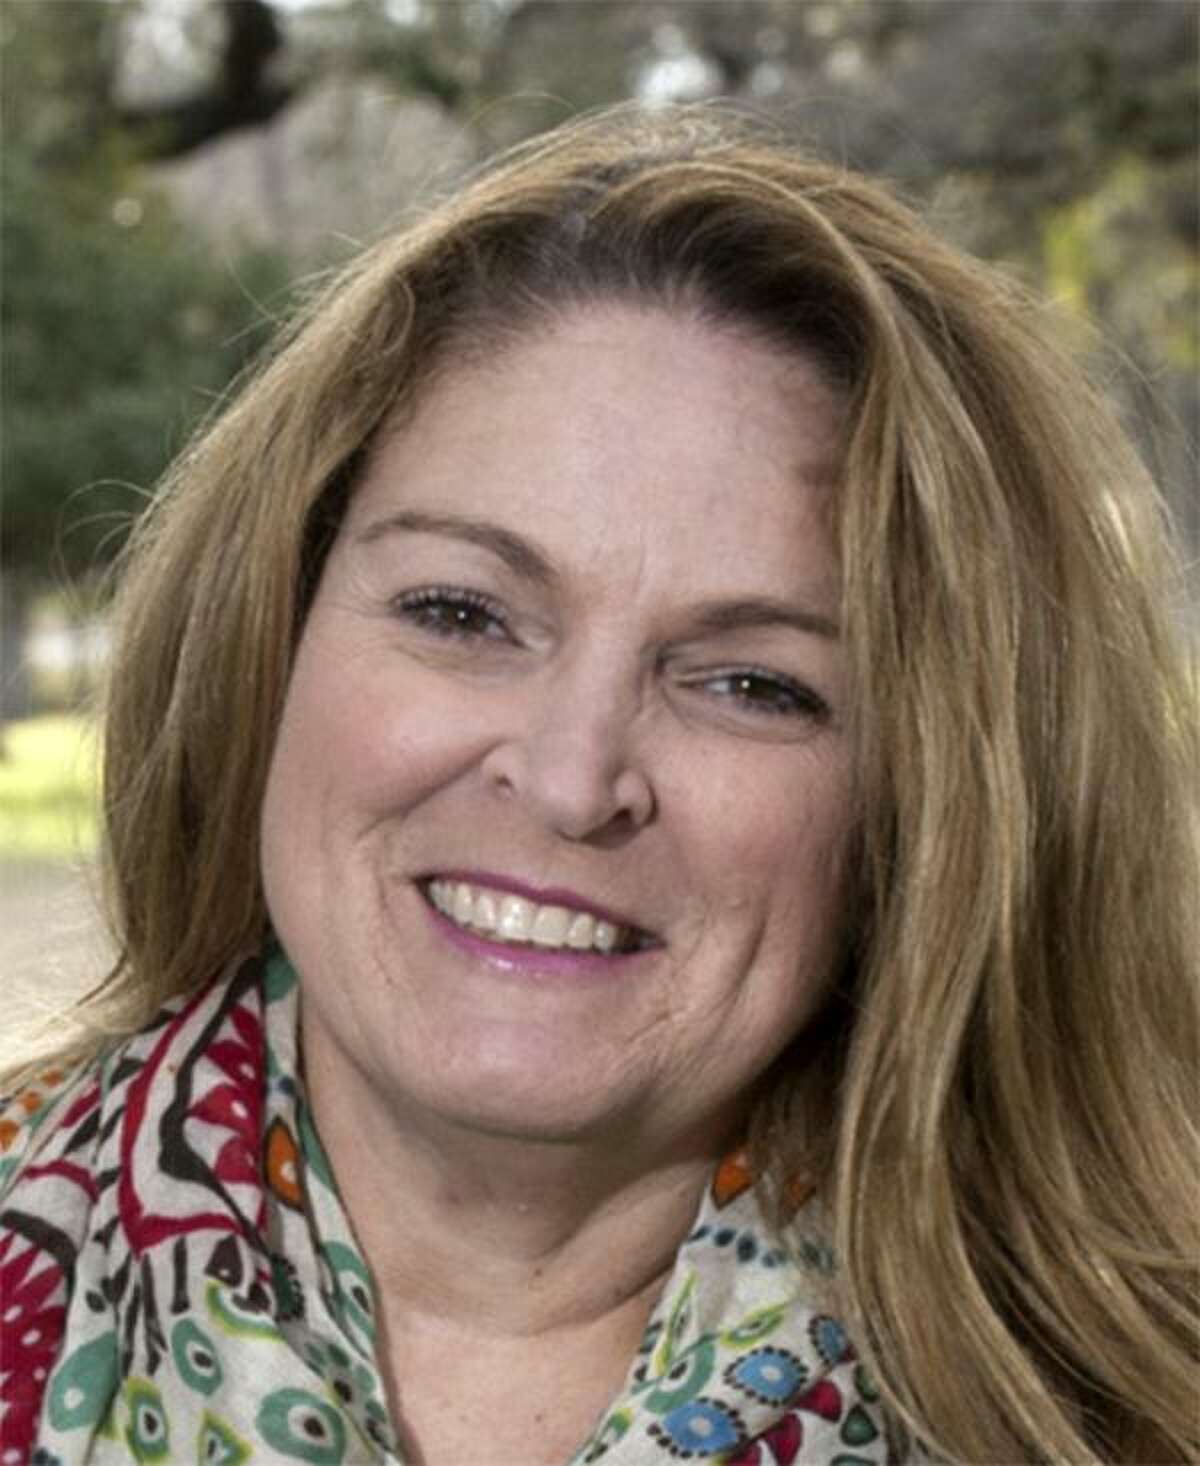 Jennie Lew Leeder is a Democratic candidate for Texas Senate District 24.